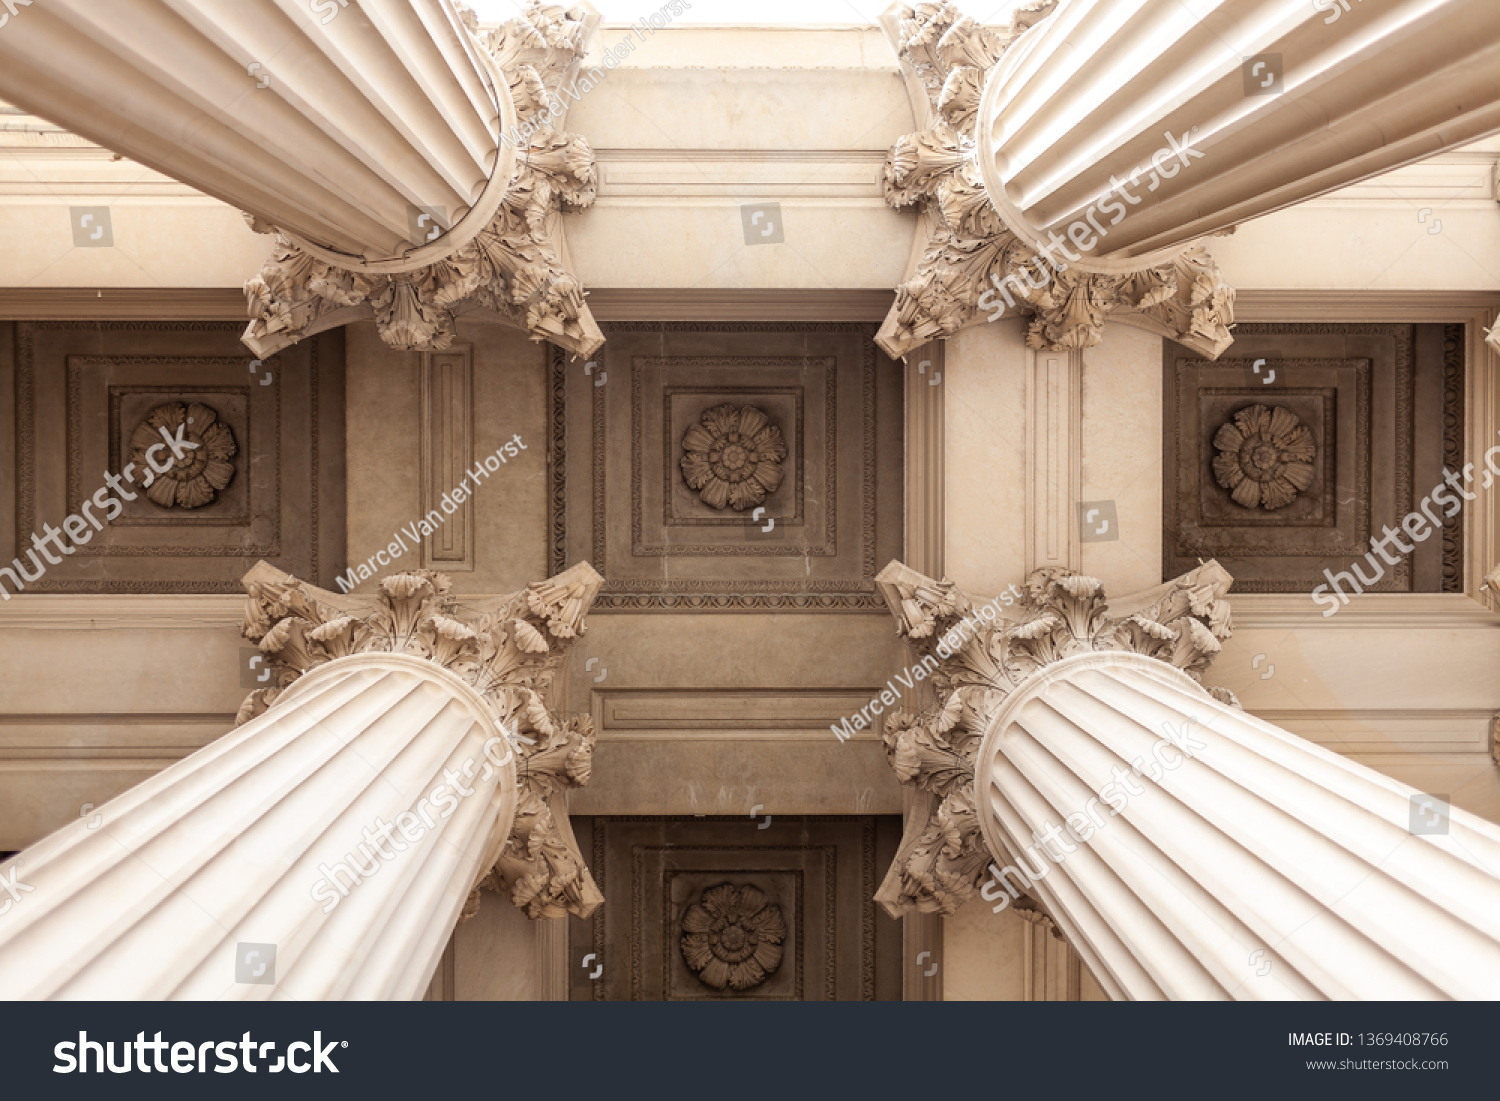 Court house or museum pillars or columns looking straight up and symmetrical  #1369408766